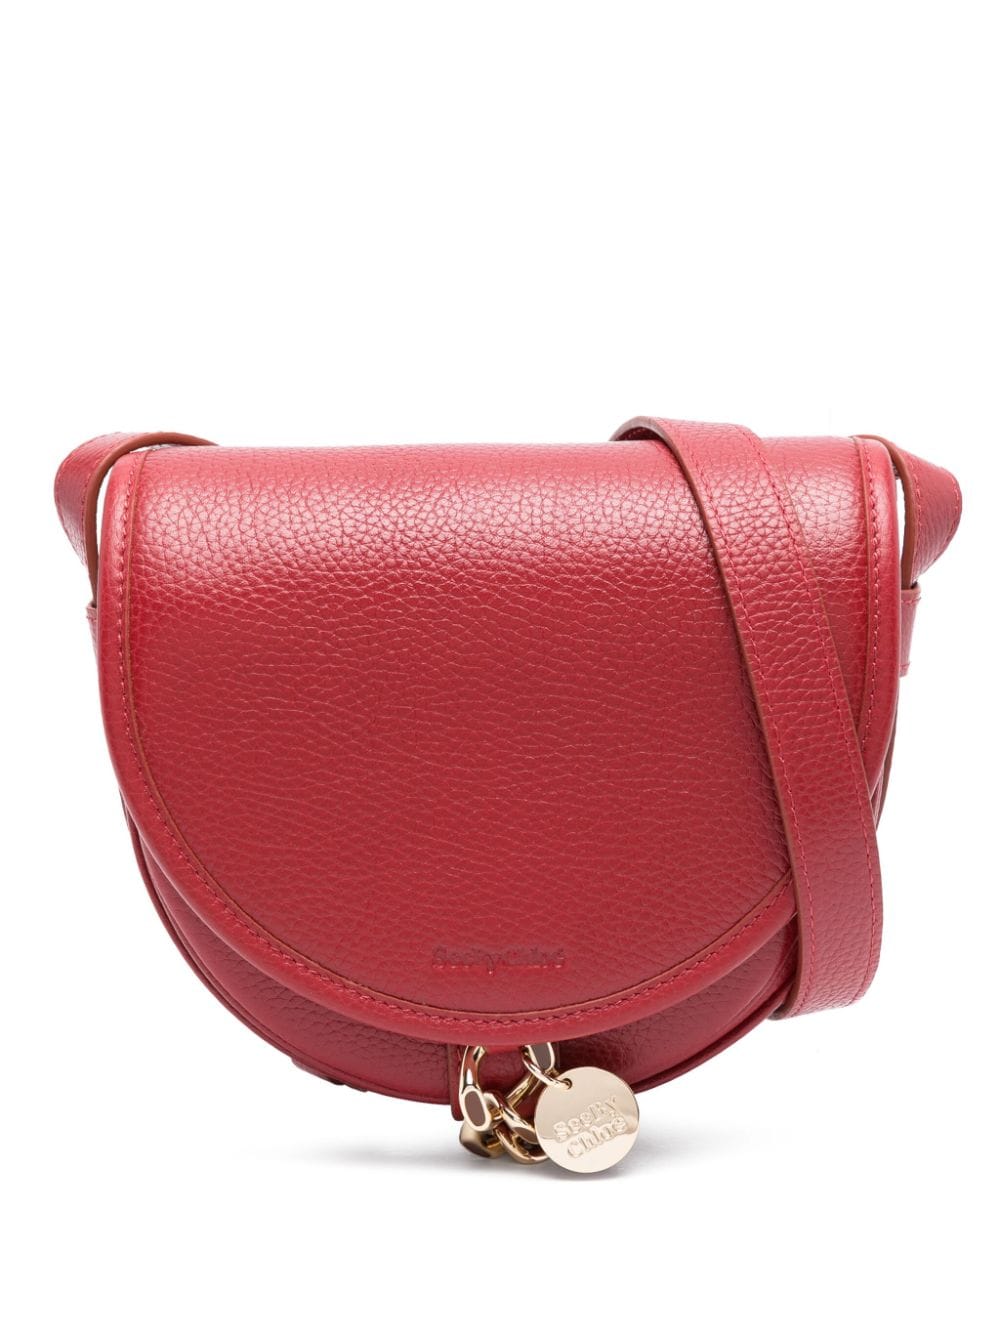 See By Chloé Small Mara Saddle Leather Crossbody Bag In Red